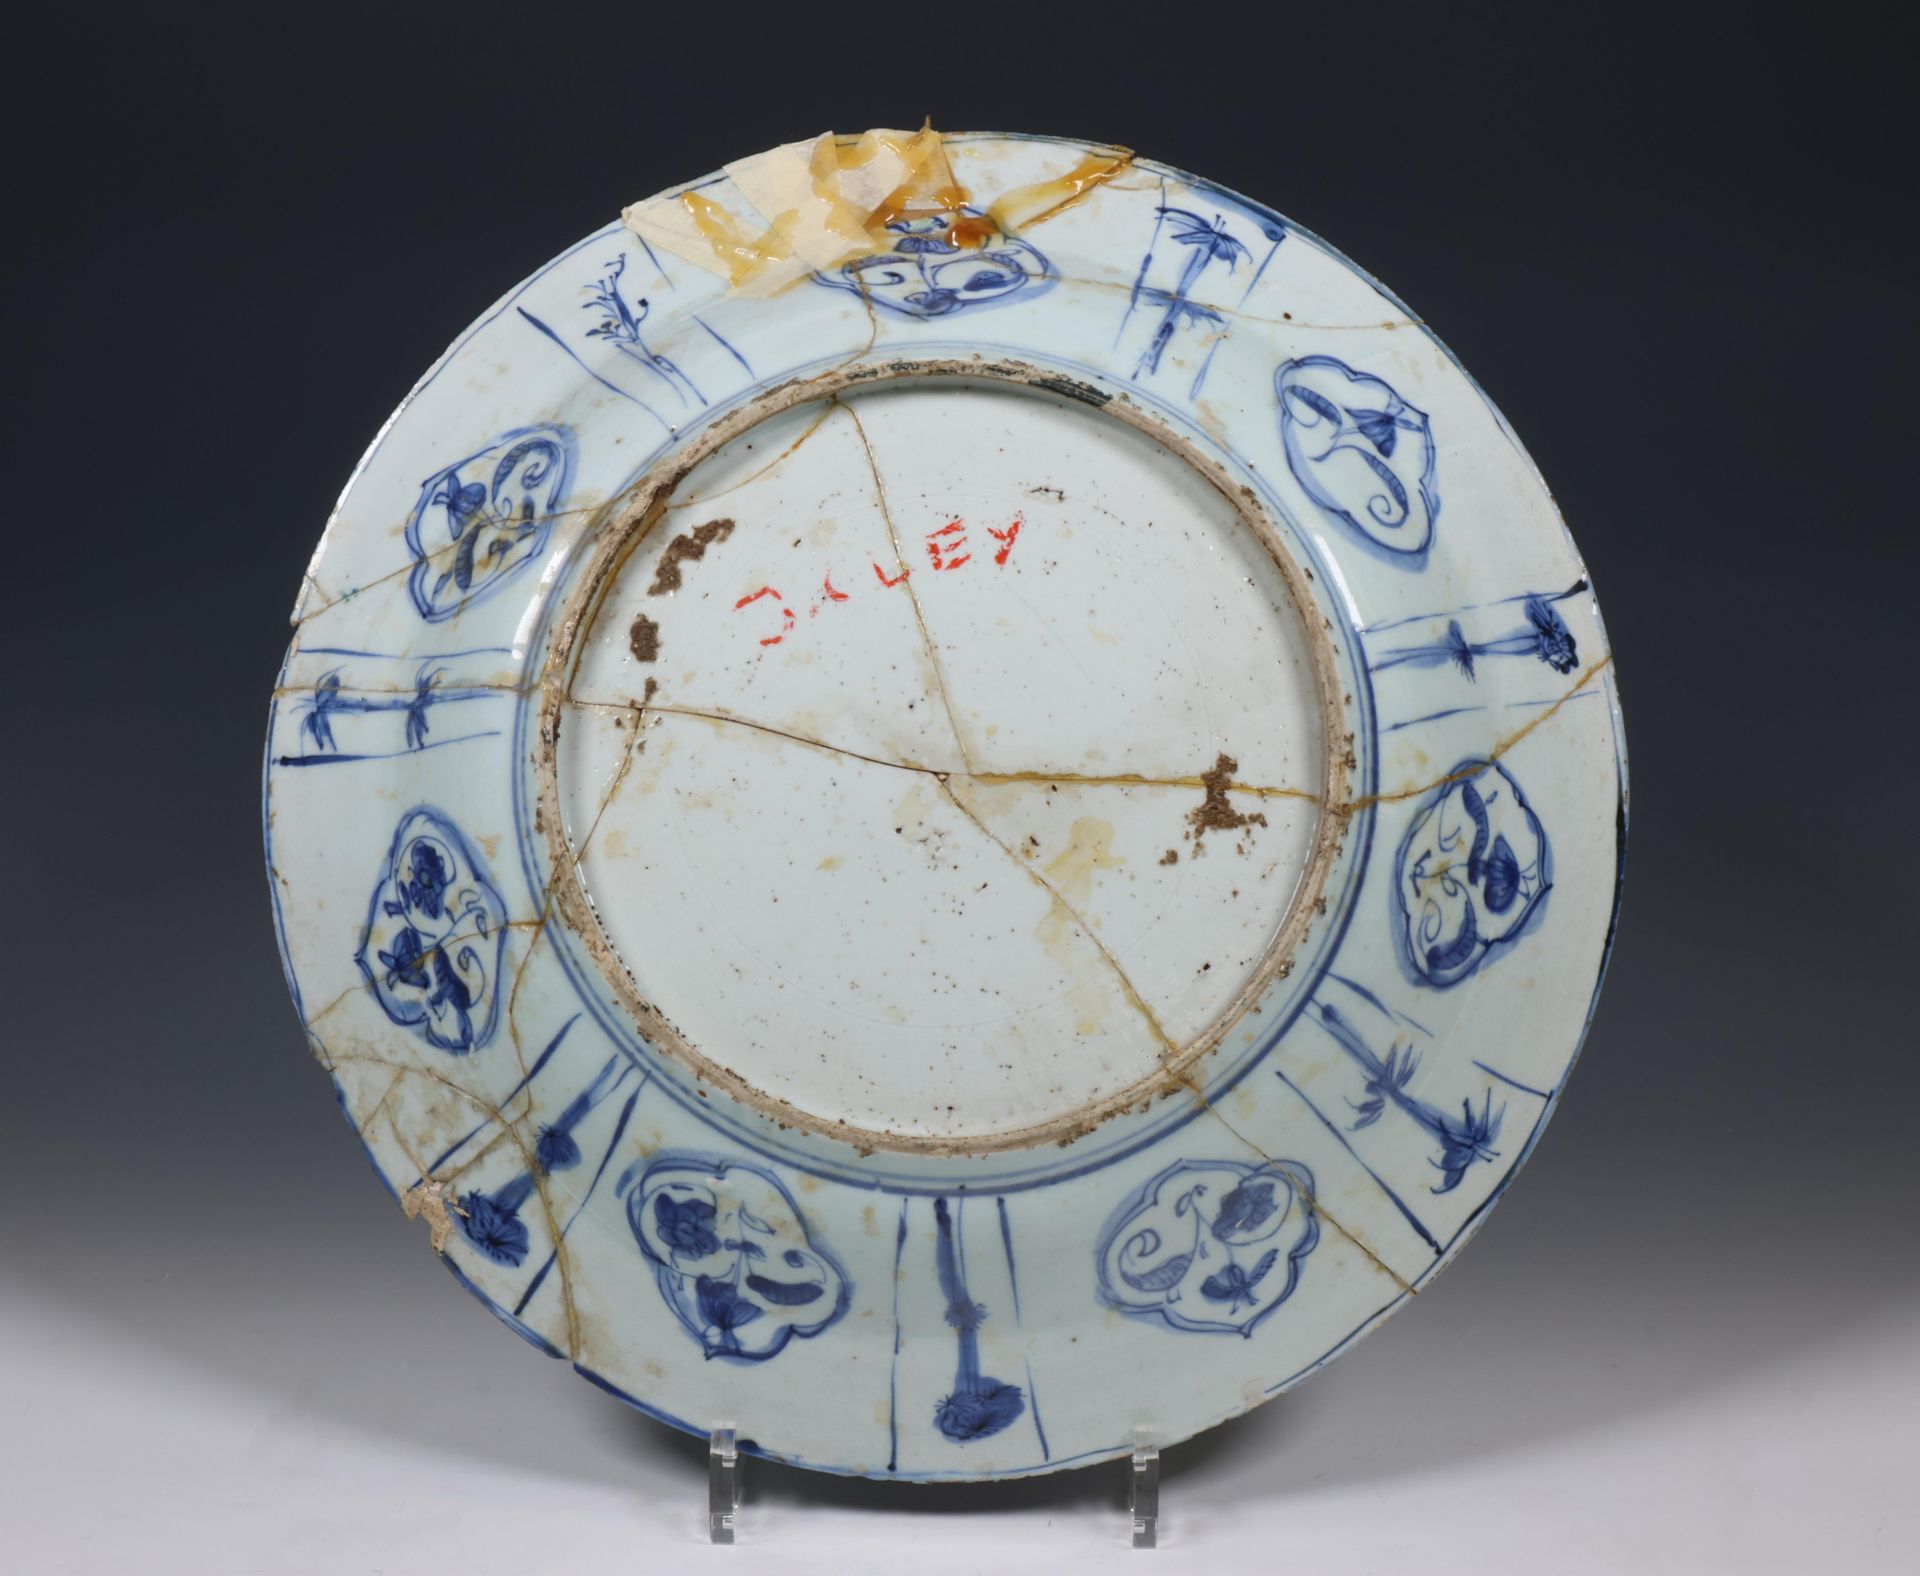 China, Transitional blue and white porcelain dish, mid 17th century, - Image 2 of 2